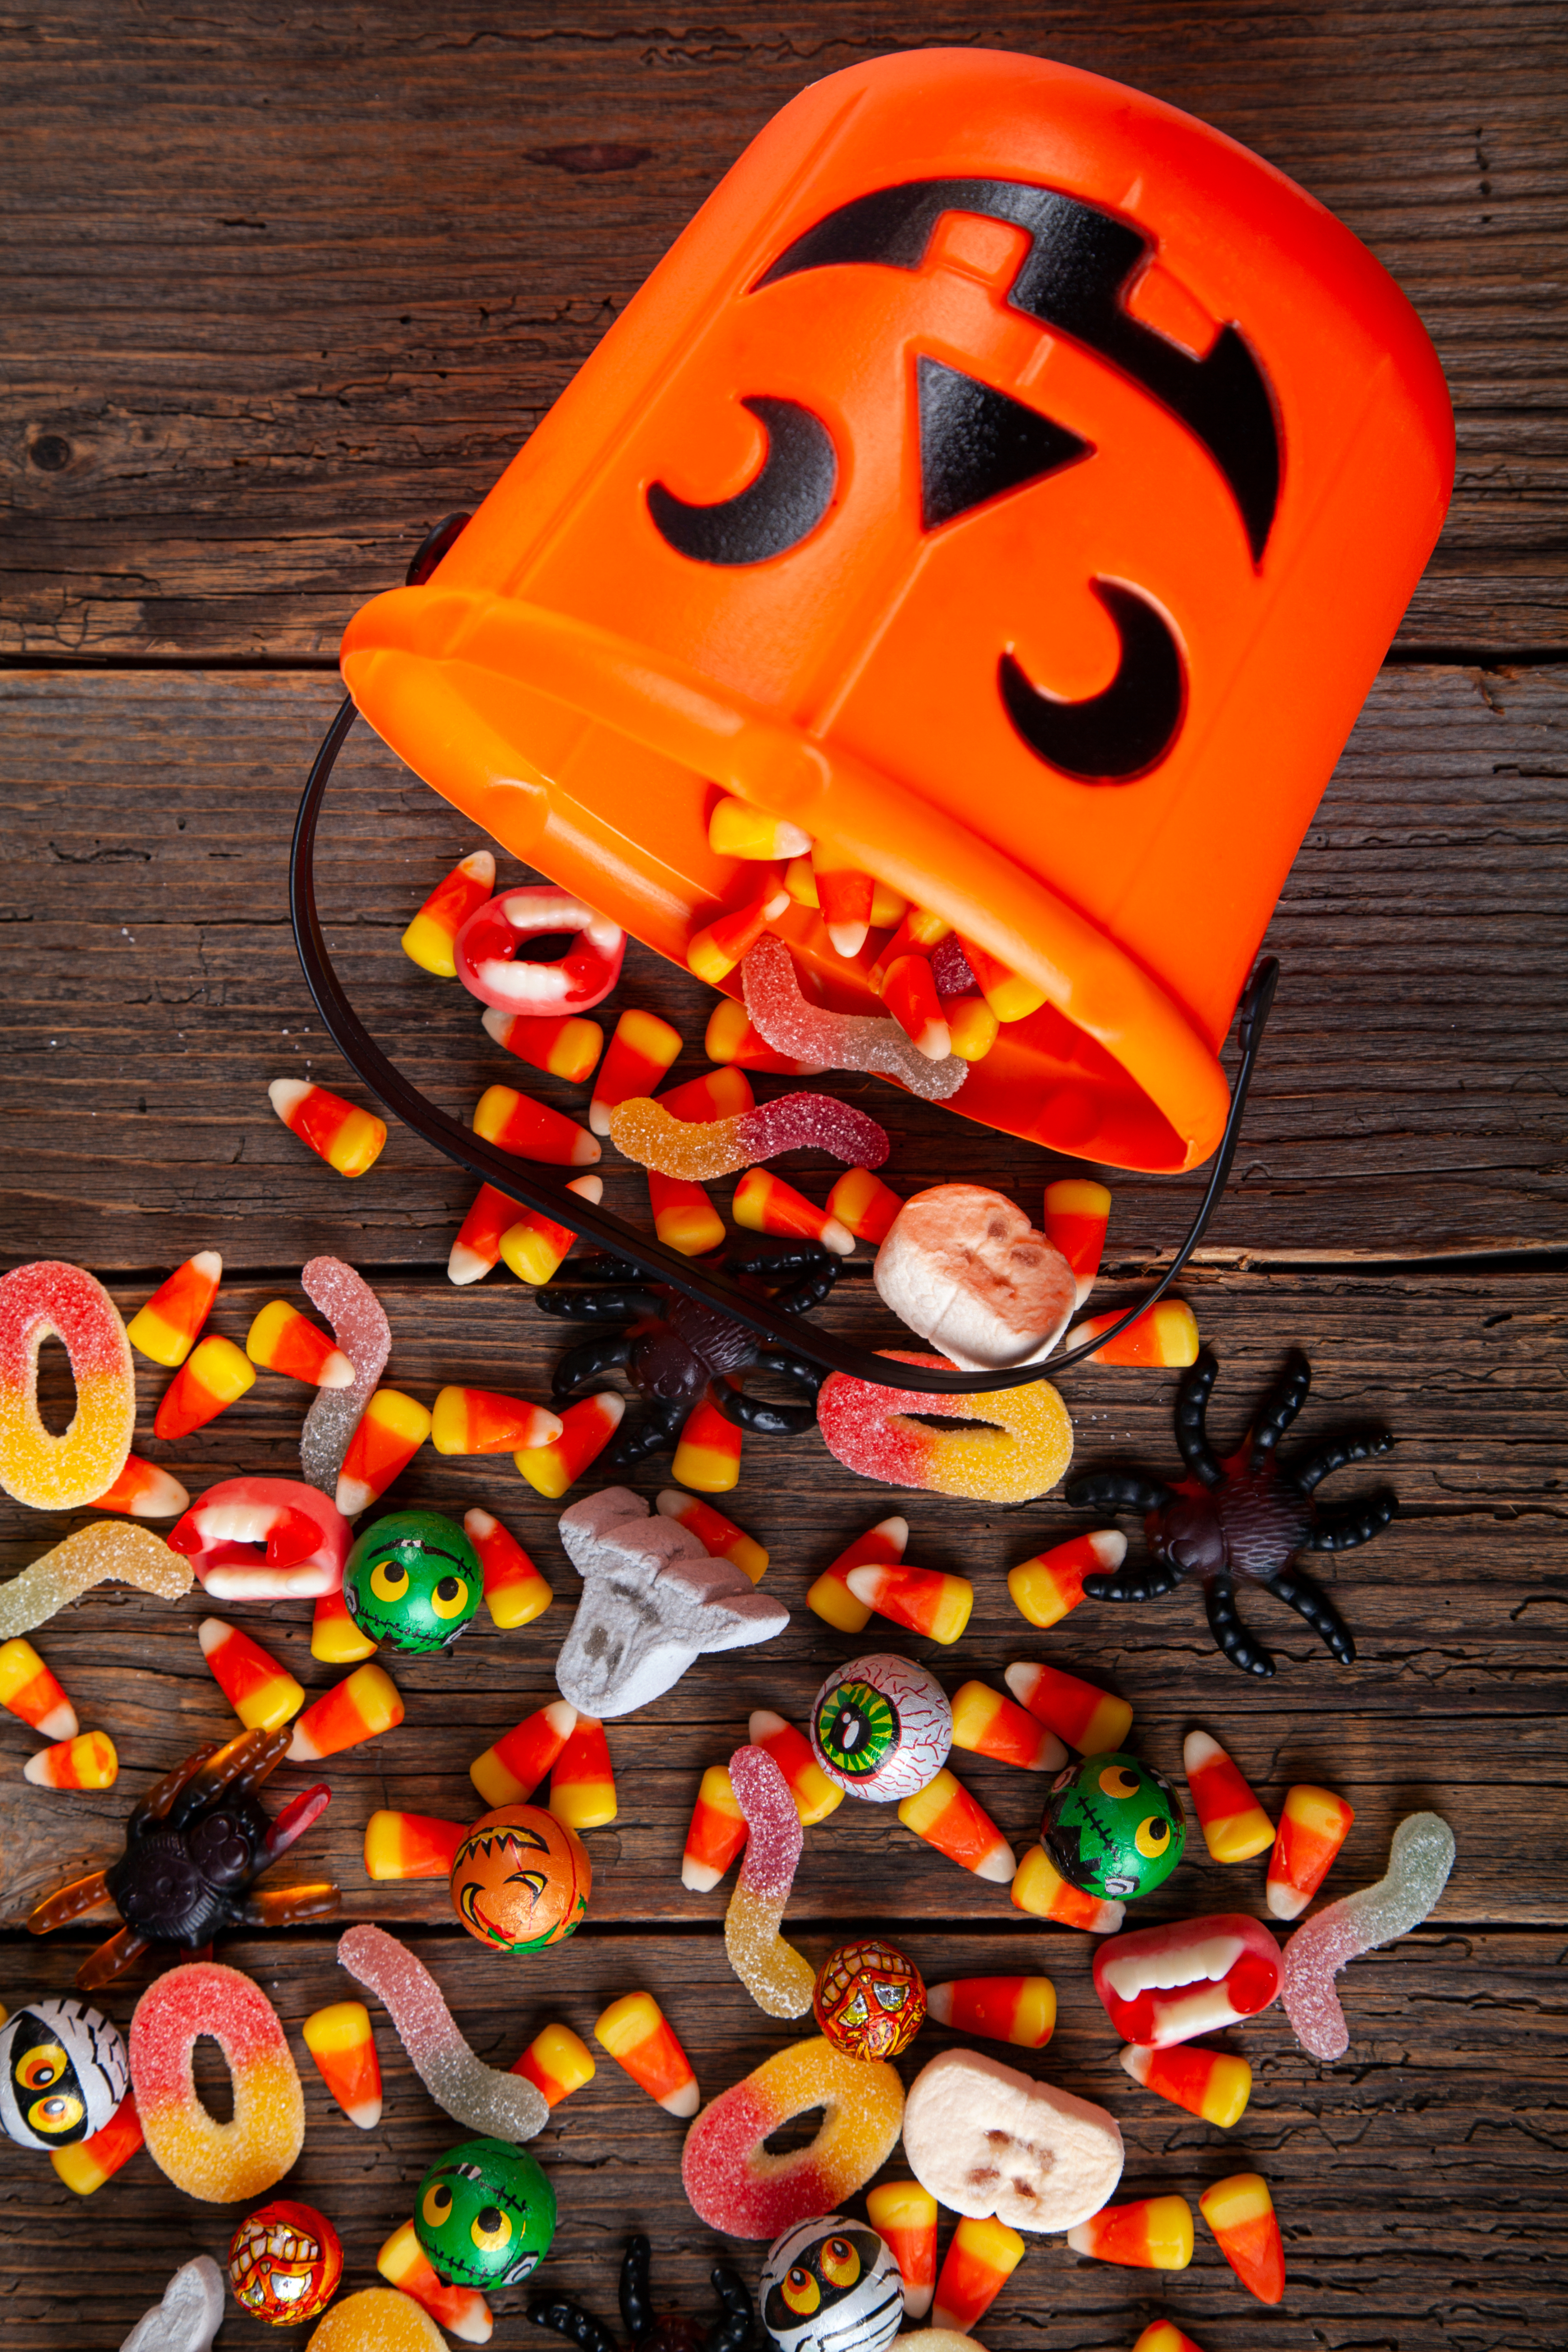 A container full of candy spilled over